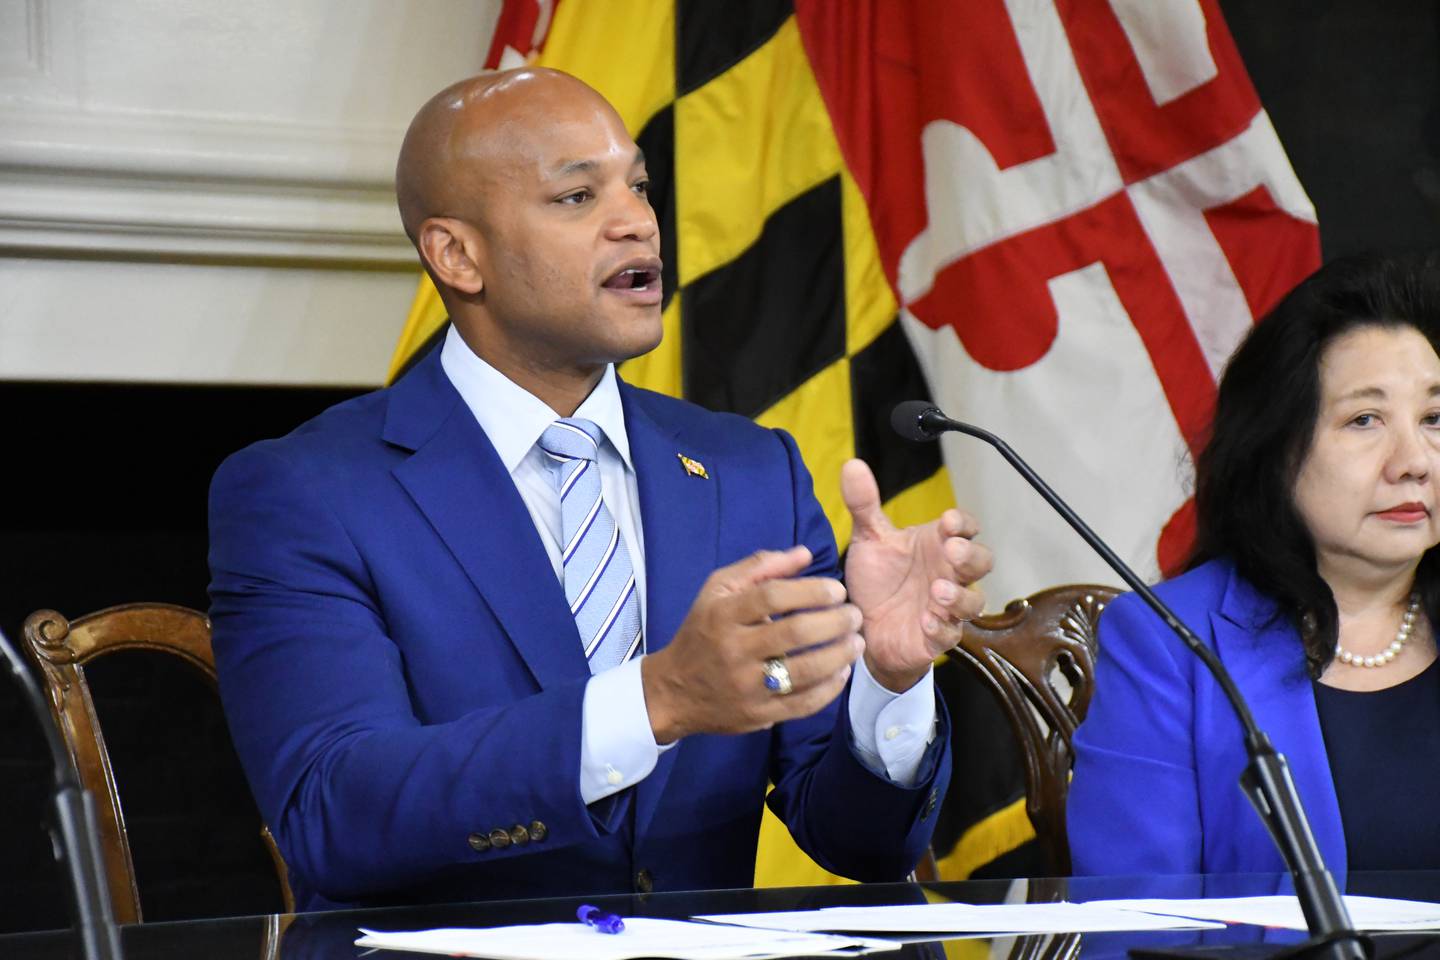 Maryland Gov. Wes Moore holds his first press conference in the Governors Reception Room at the State House in Annapolis on Thursday, Jan. 19, 2023. Sitting next to him is his nominee for secretary of state, Susan Lee.